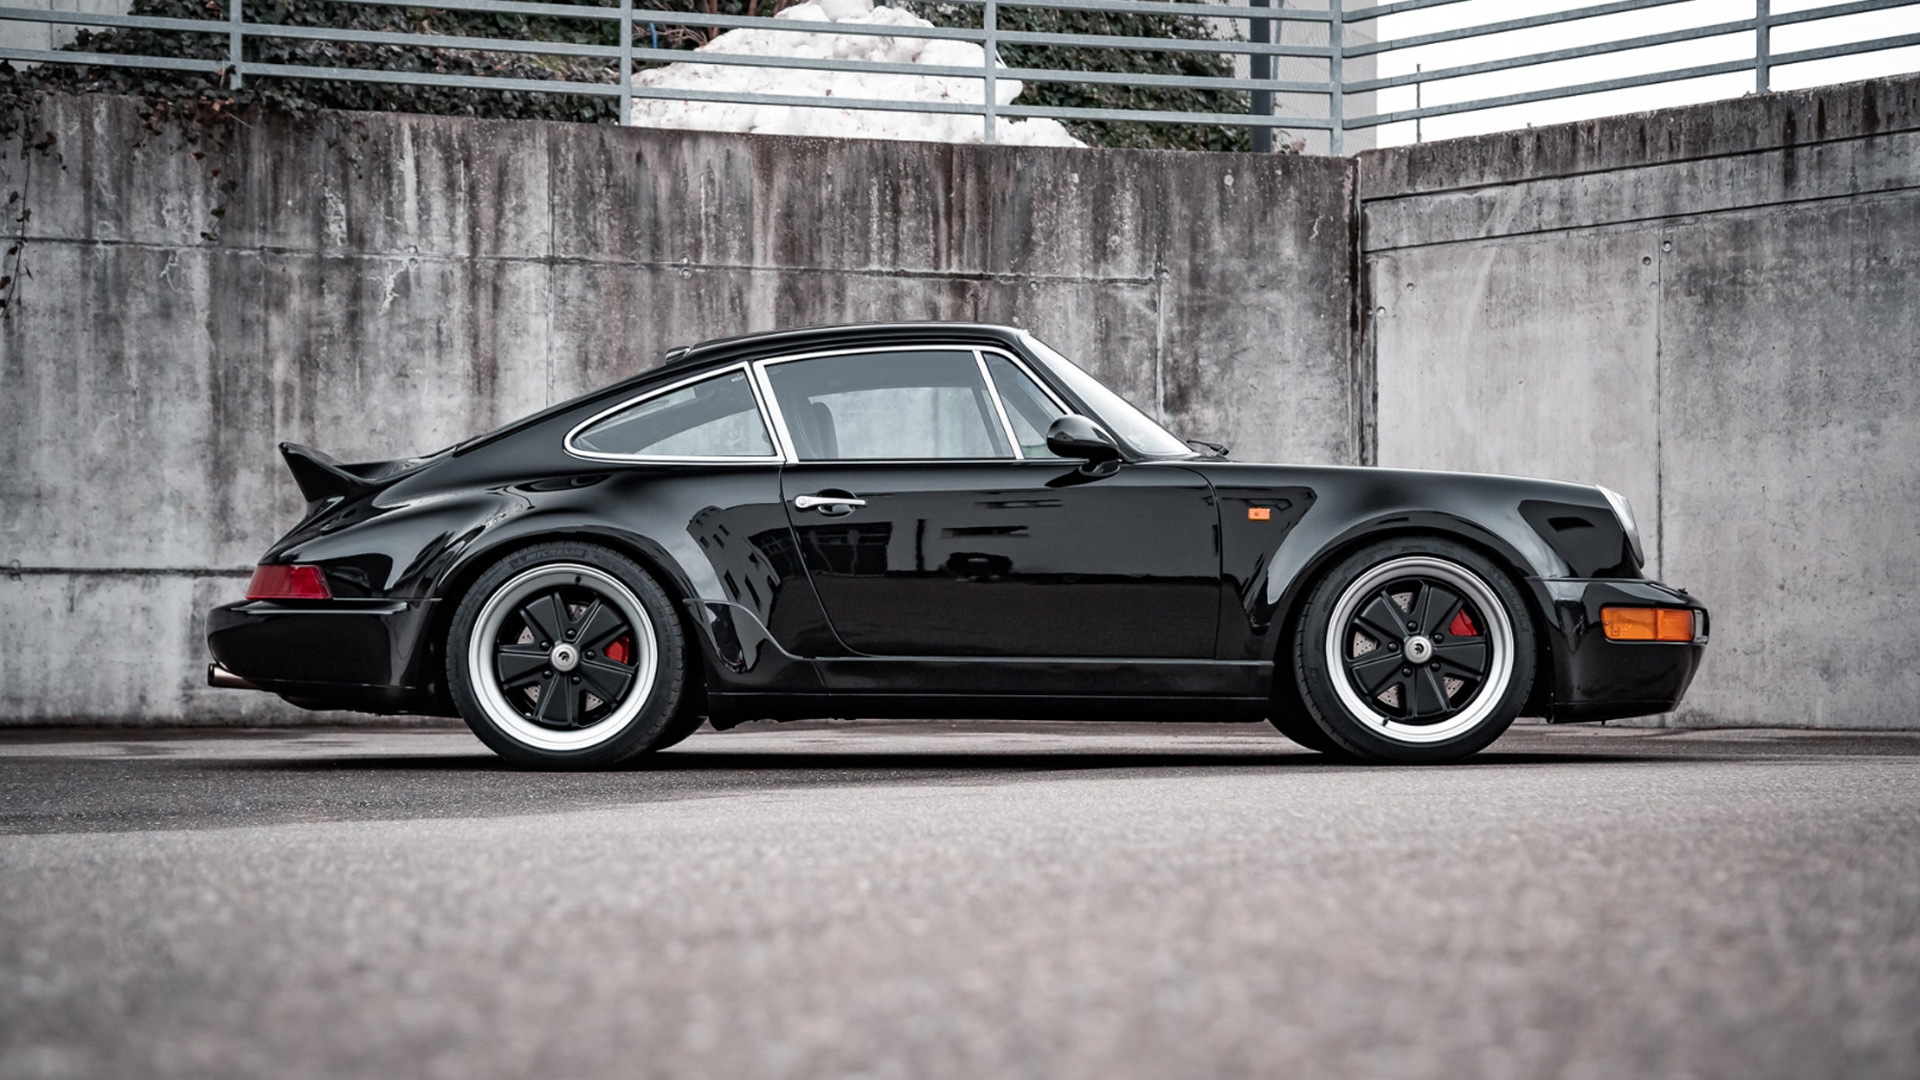 964-generation Porsche 911 Turbo by Ares